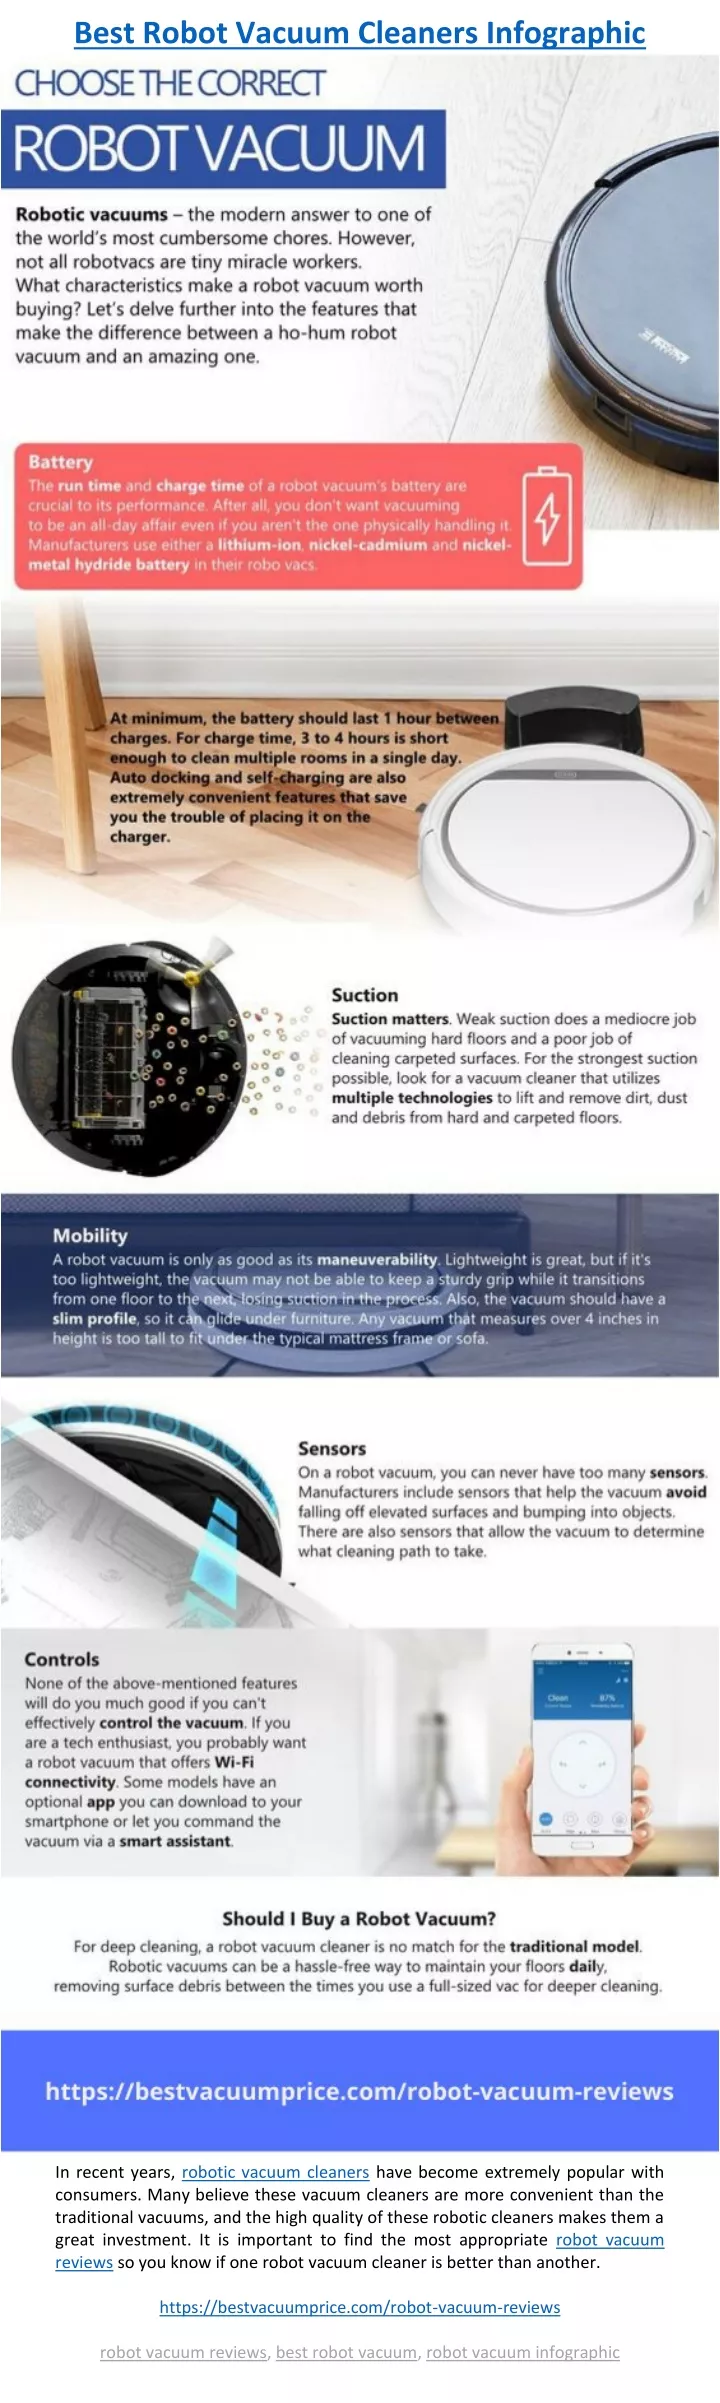 best robot vacuum cleaners infographic